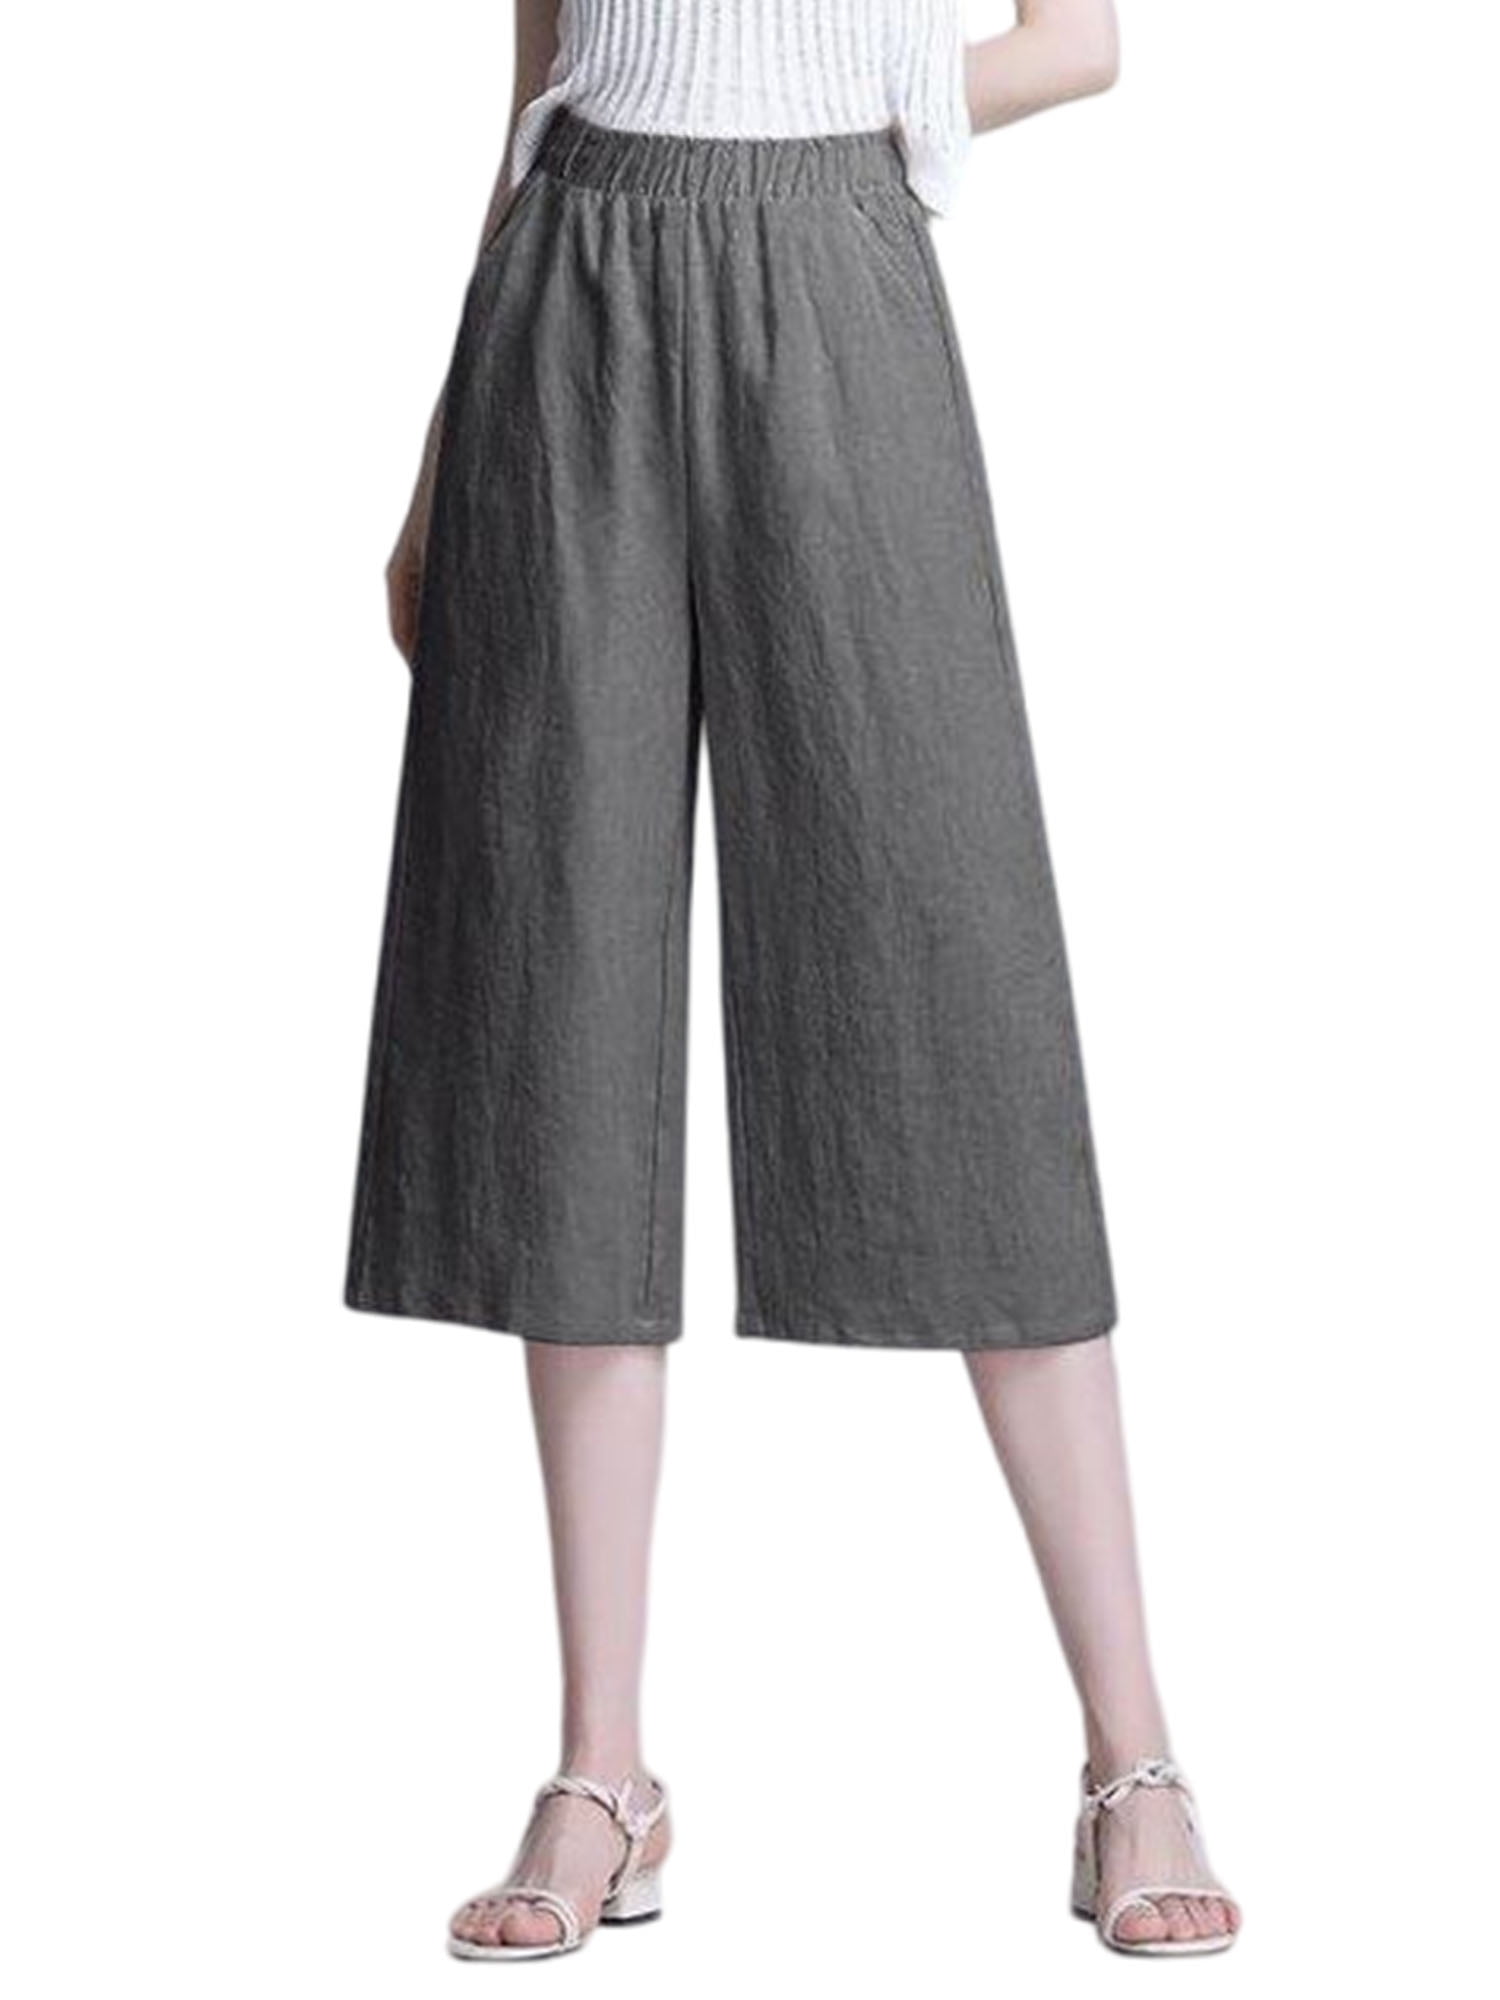 Women's High Waisted Casual Wide Leg Linen Palazzo Pants with Pockets ...